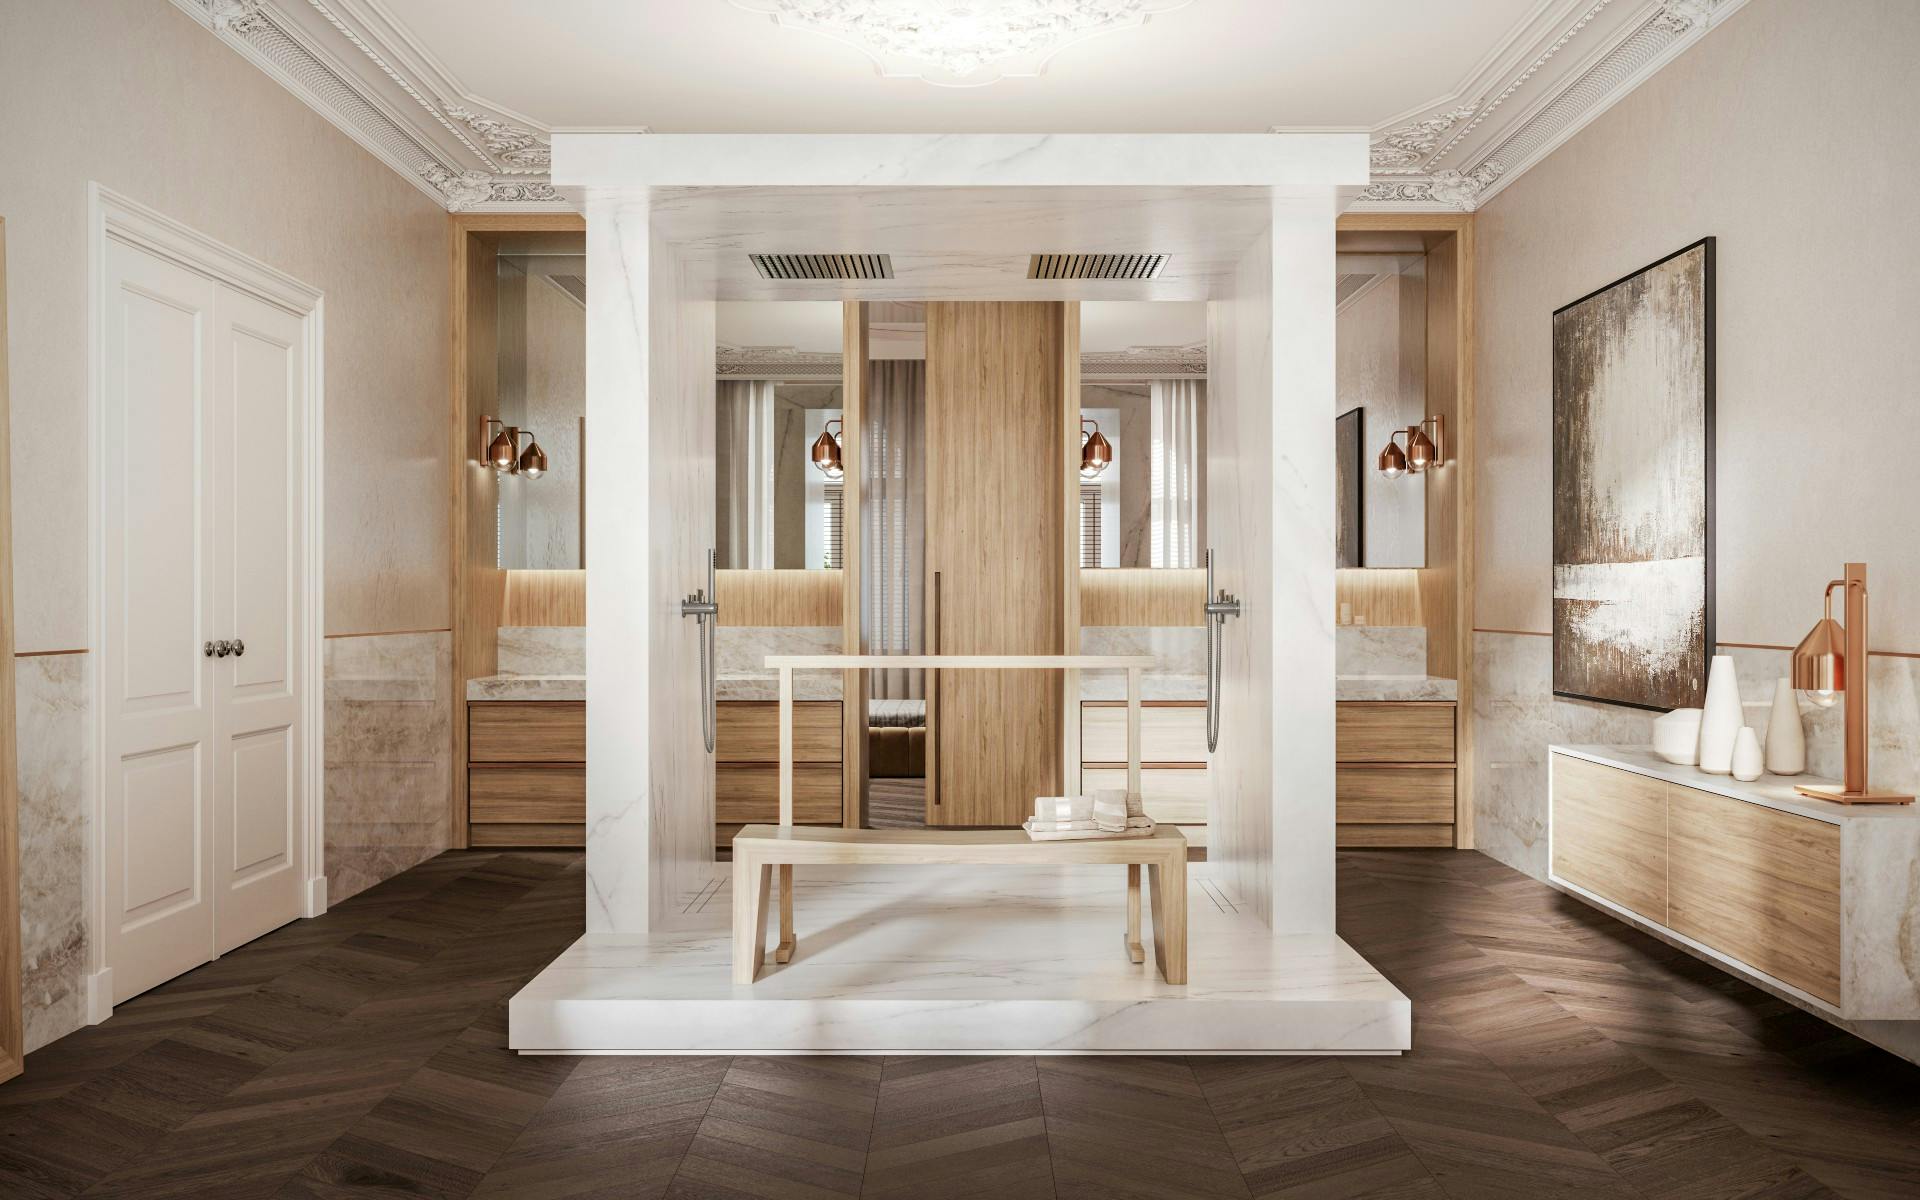 Numéro d'image 32 de la section actuelle de The Palazzo: the bathroom designed by Remy Meijers in which the shower takes centre stage de Cosentino Canada